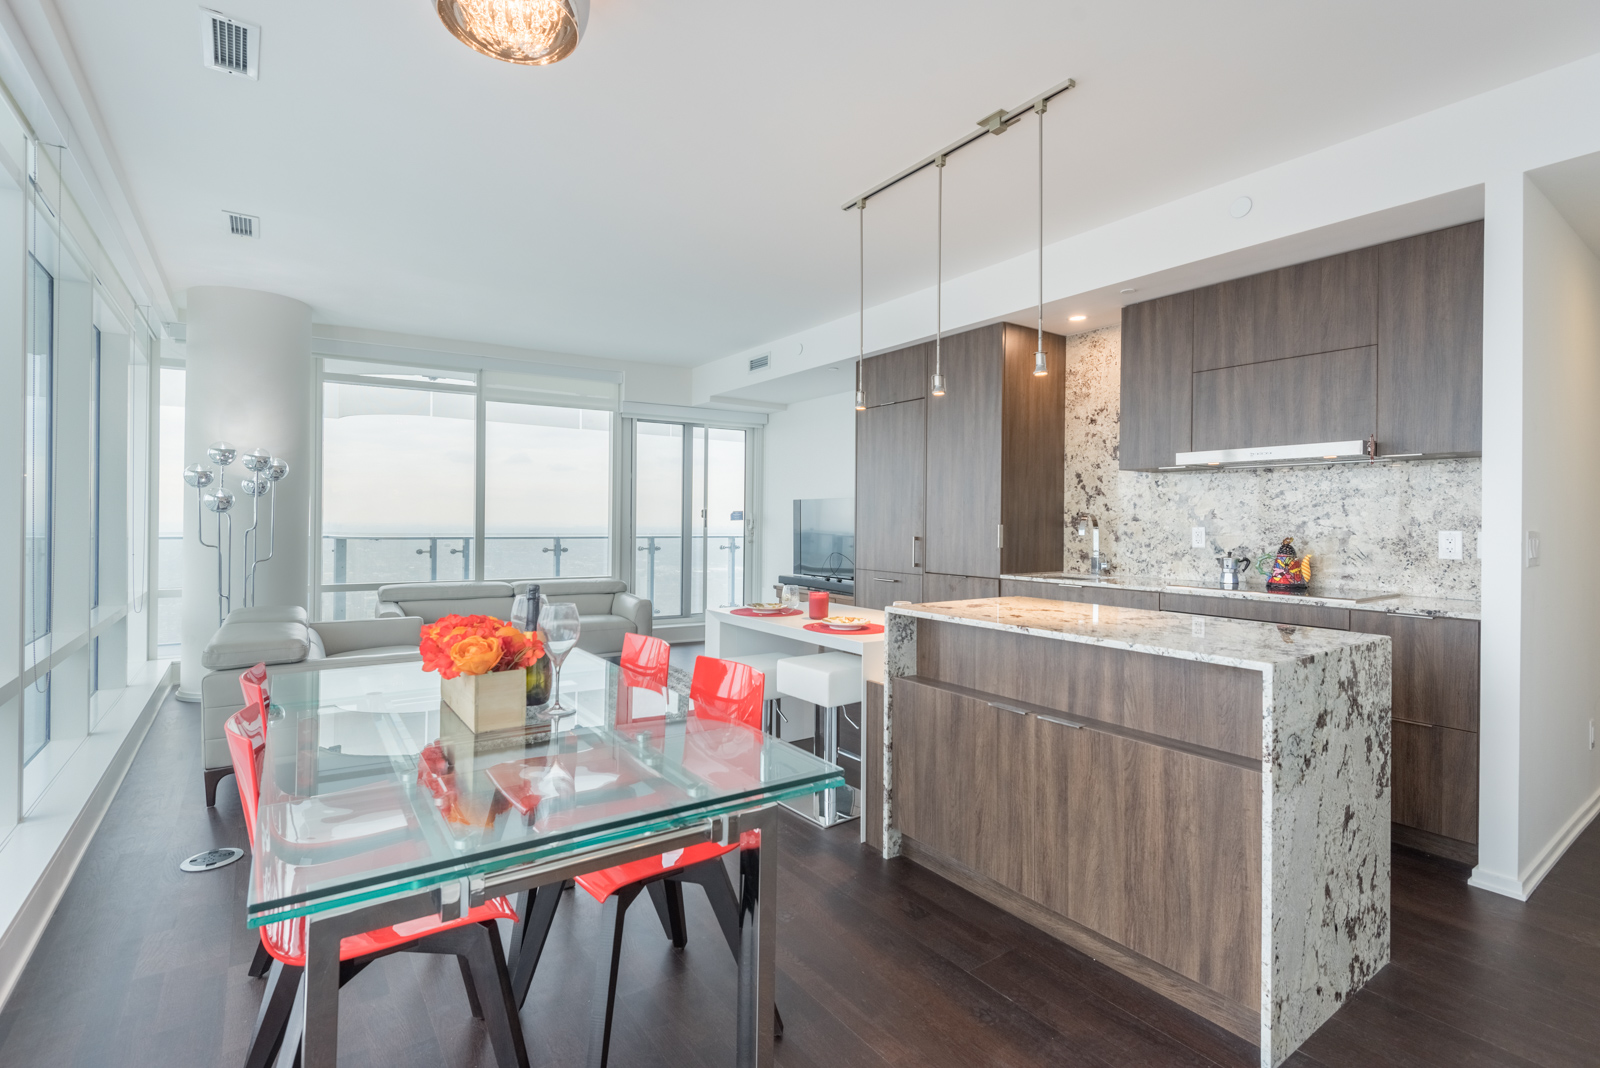 This image shows the condo's open concept design, including the kitchen and living room